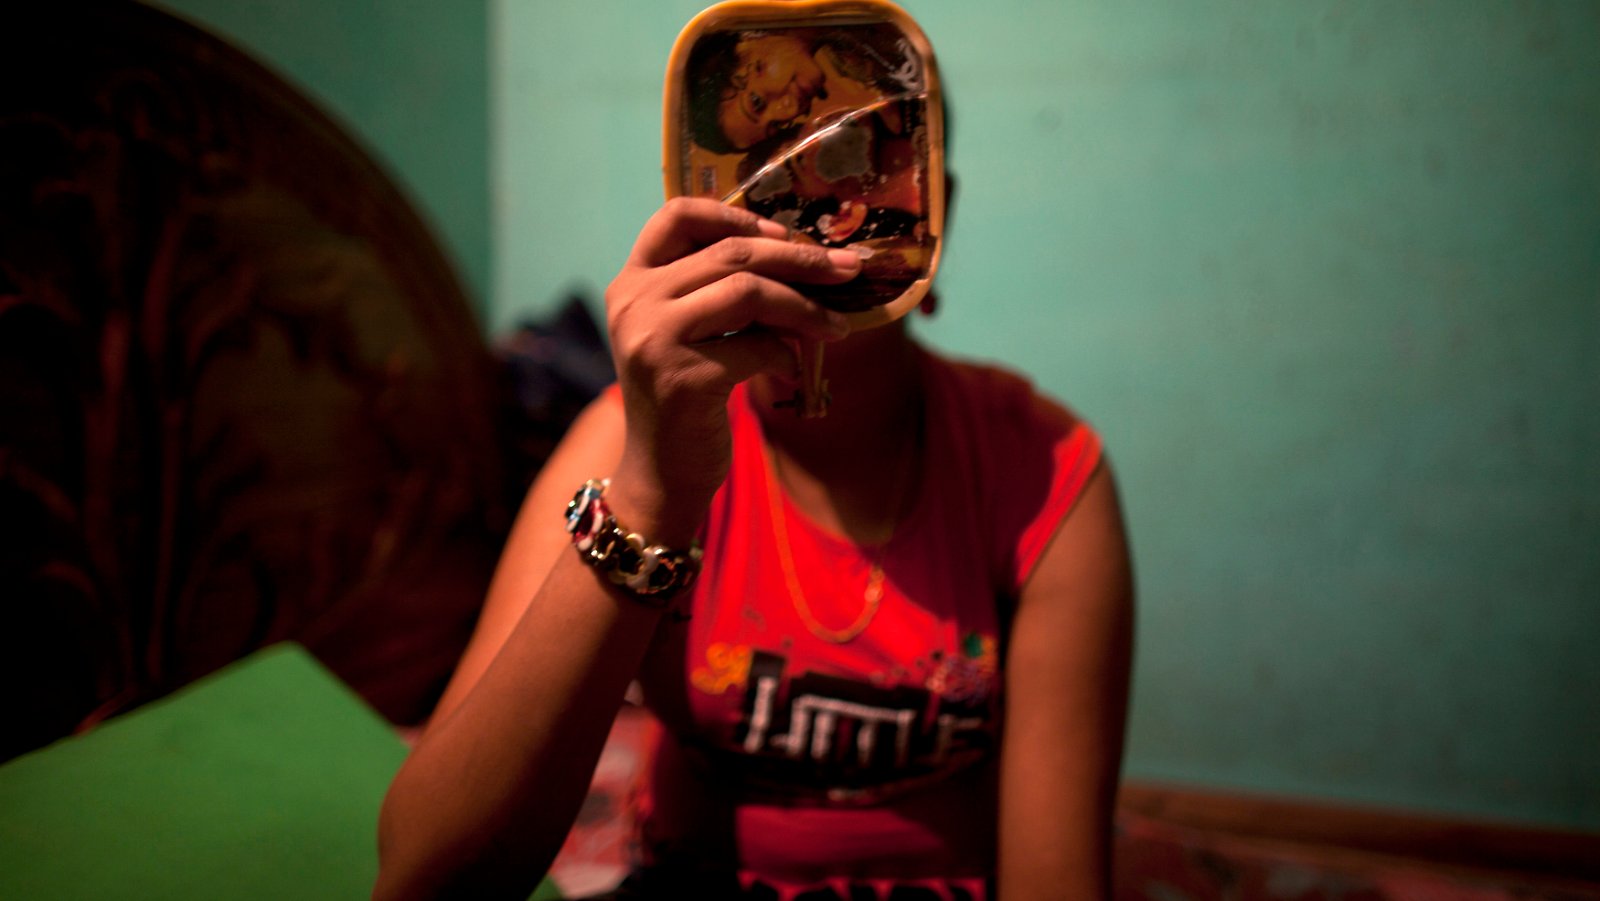 Twelve-year-old prostitute Mukti applies makeup before serving a customer inside her small room at a brothel in Faridpur, located in central Bangladesh February 22, 2012. REUTERS/Andrew Biraj